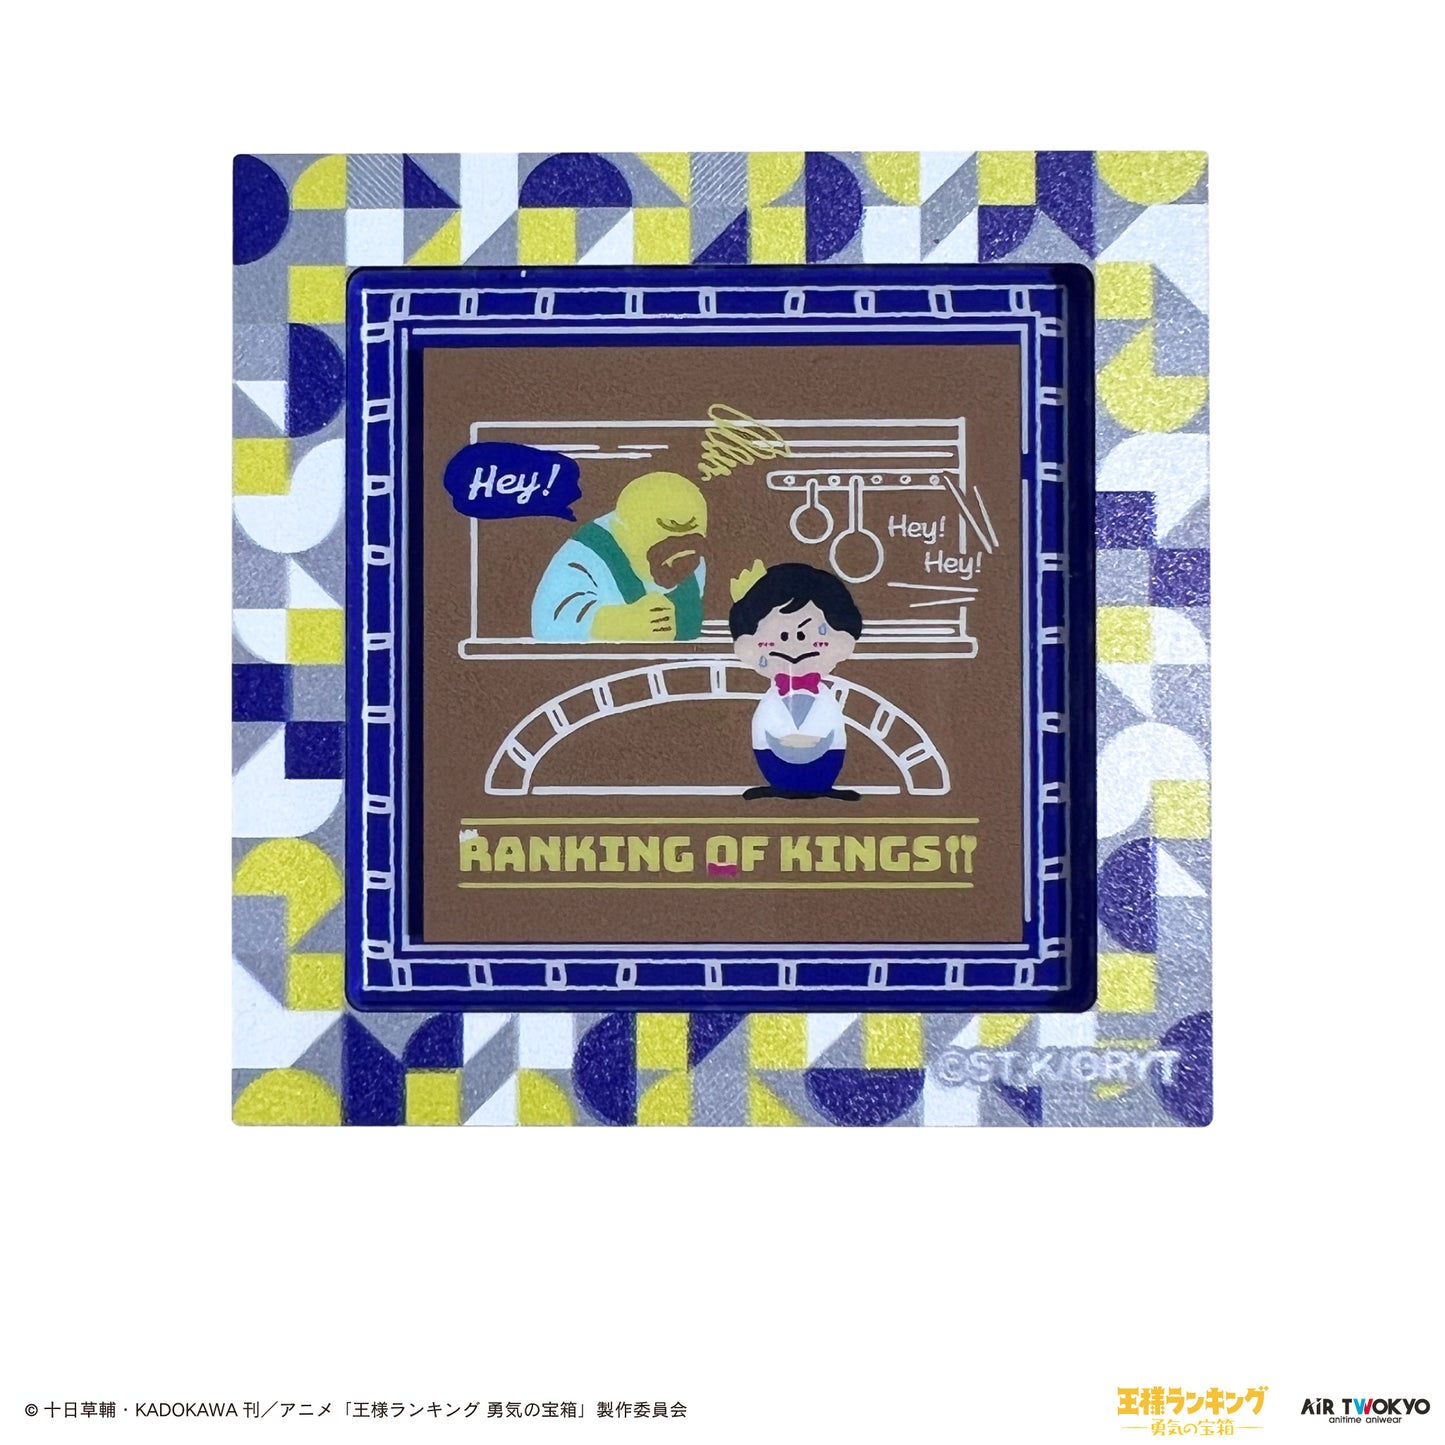 “Ranking of Kings: The Treasure Chest of Courage”scene illustration picture frame magnet